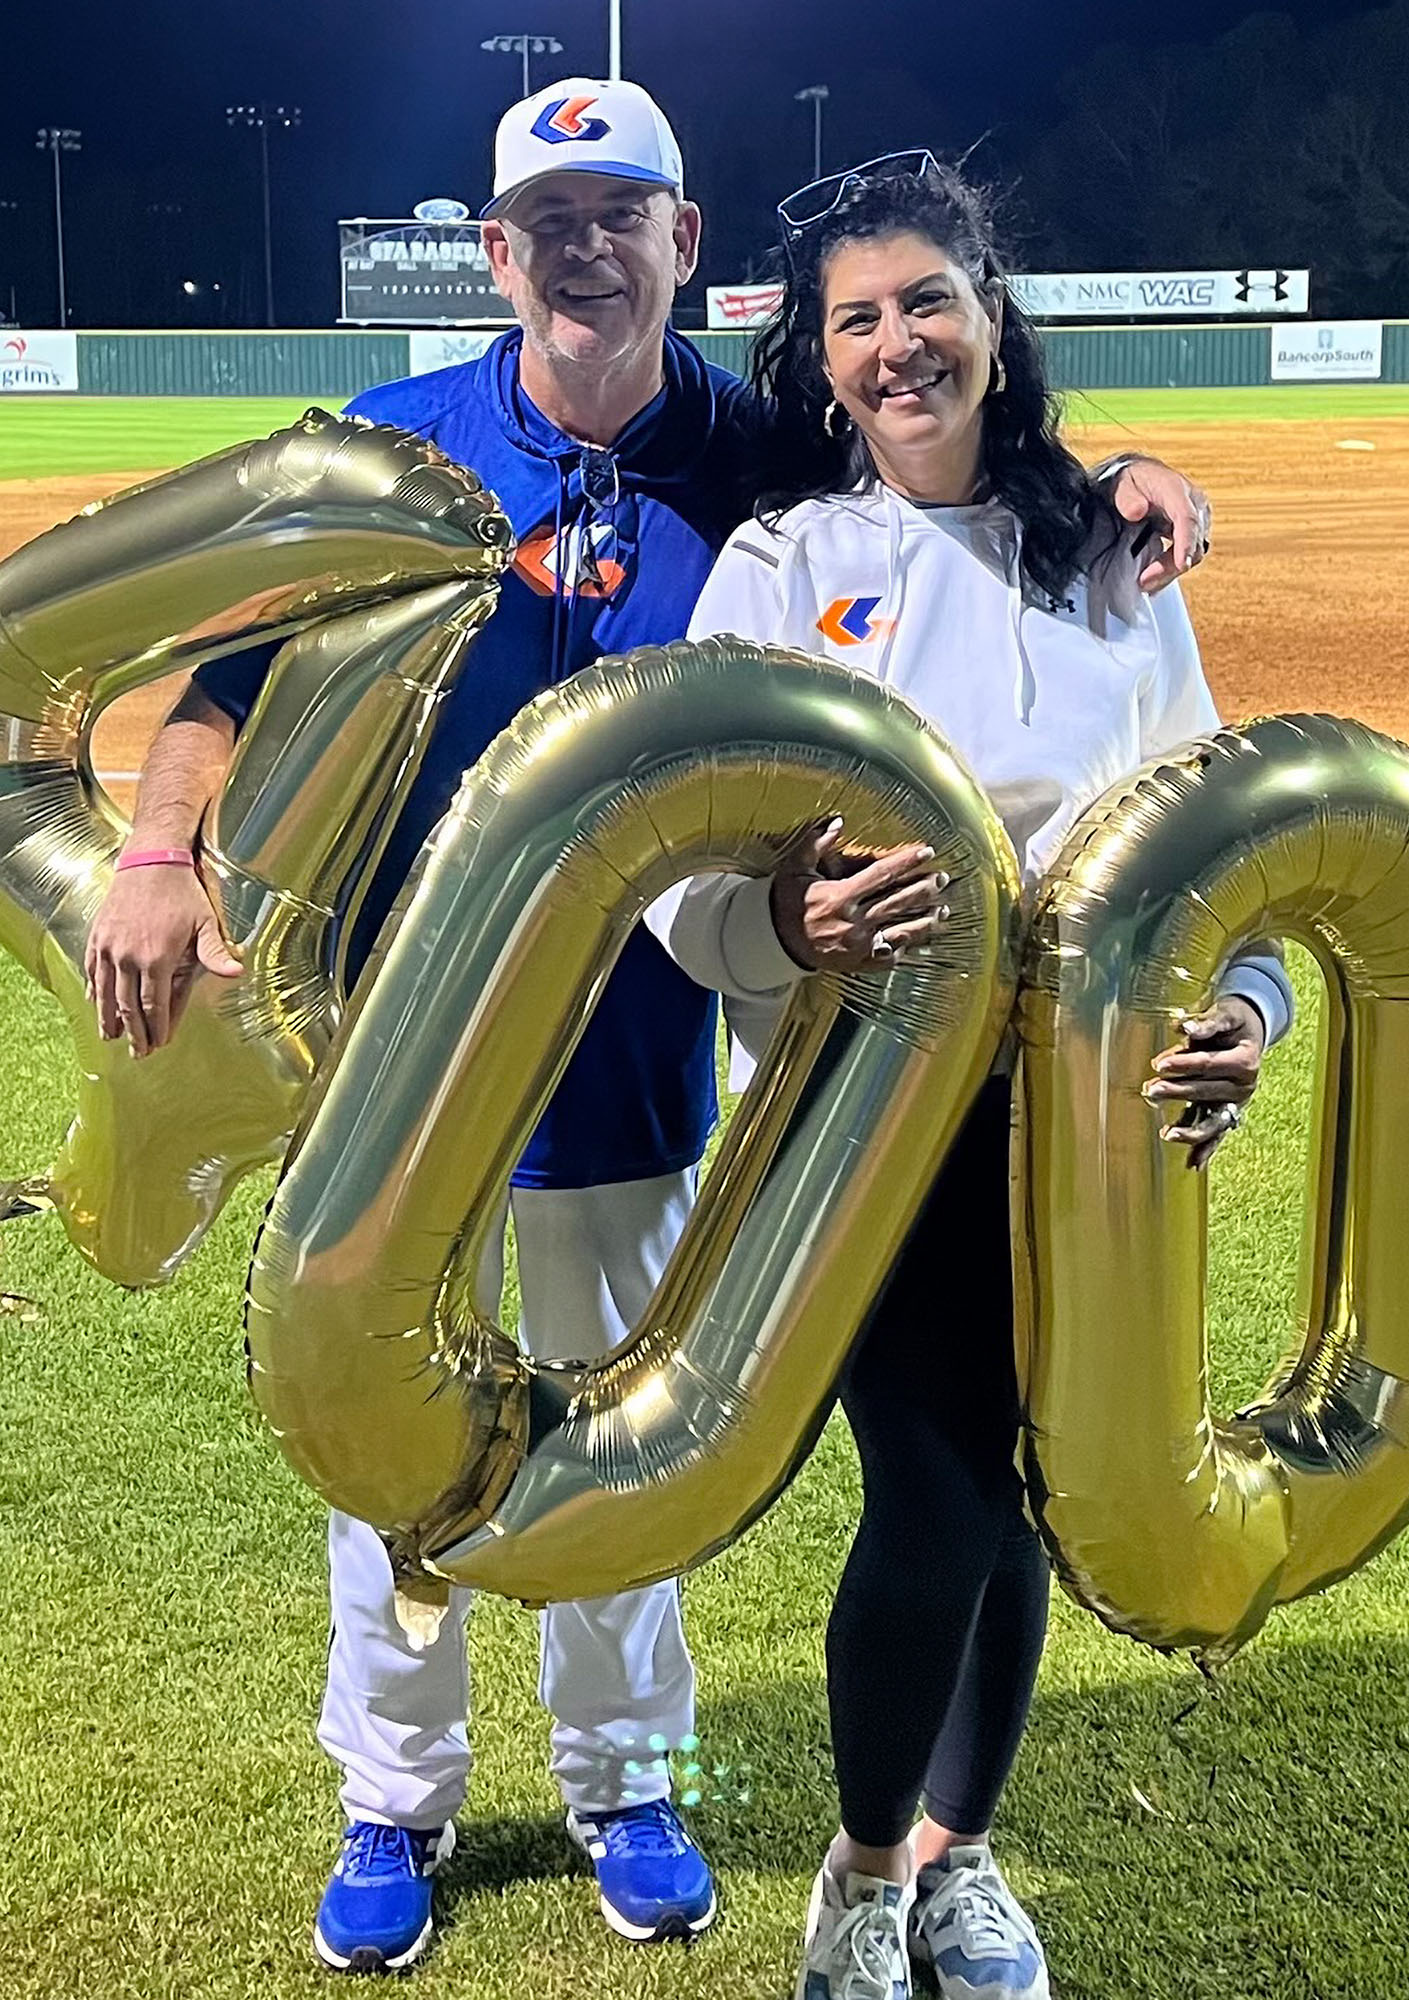 Two people on a baseball field holding balloons that say 400